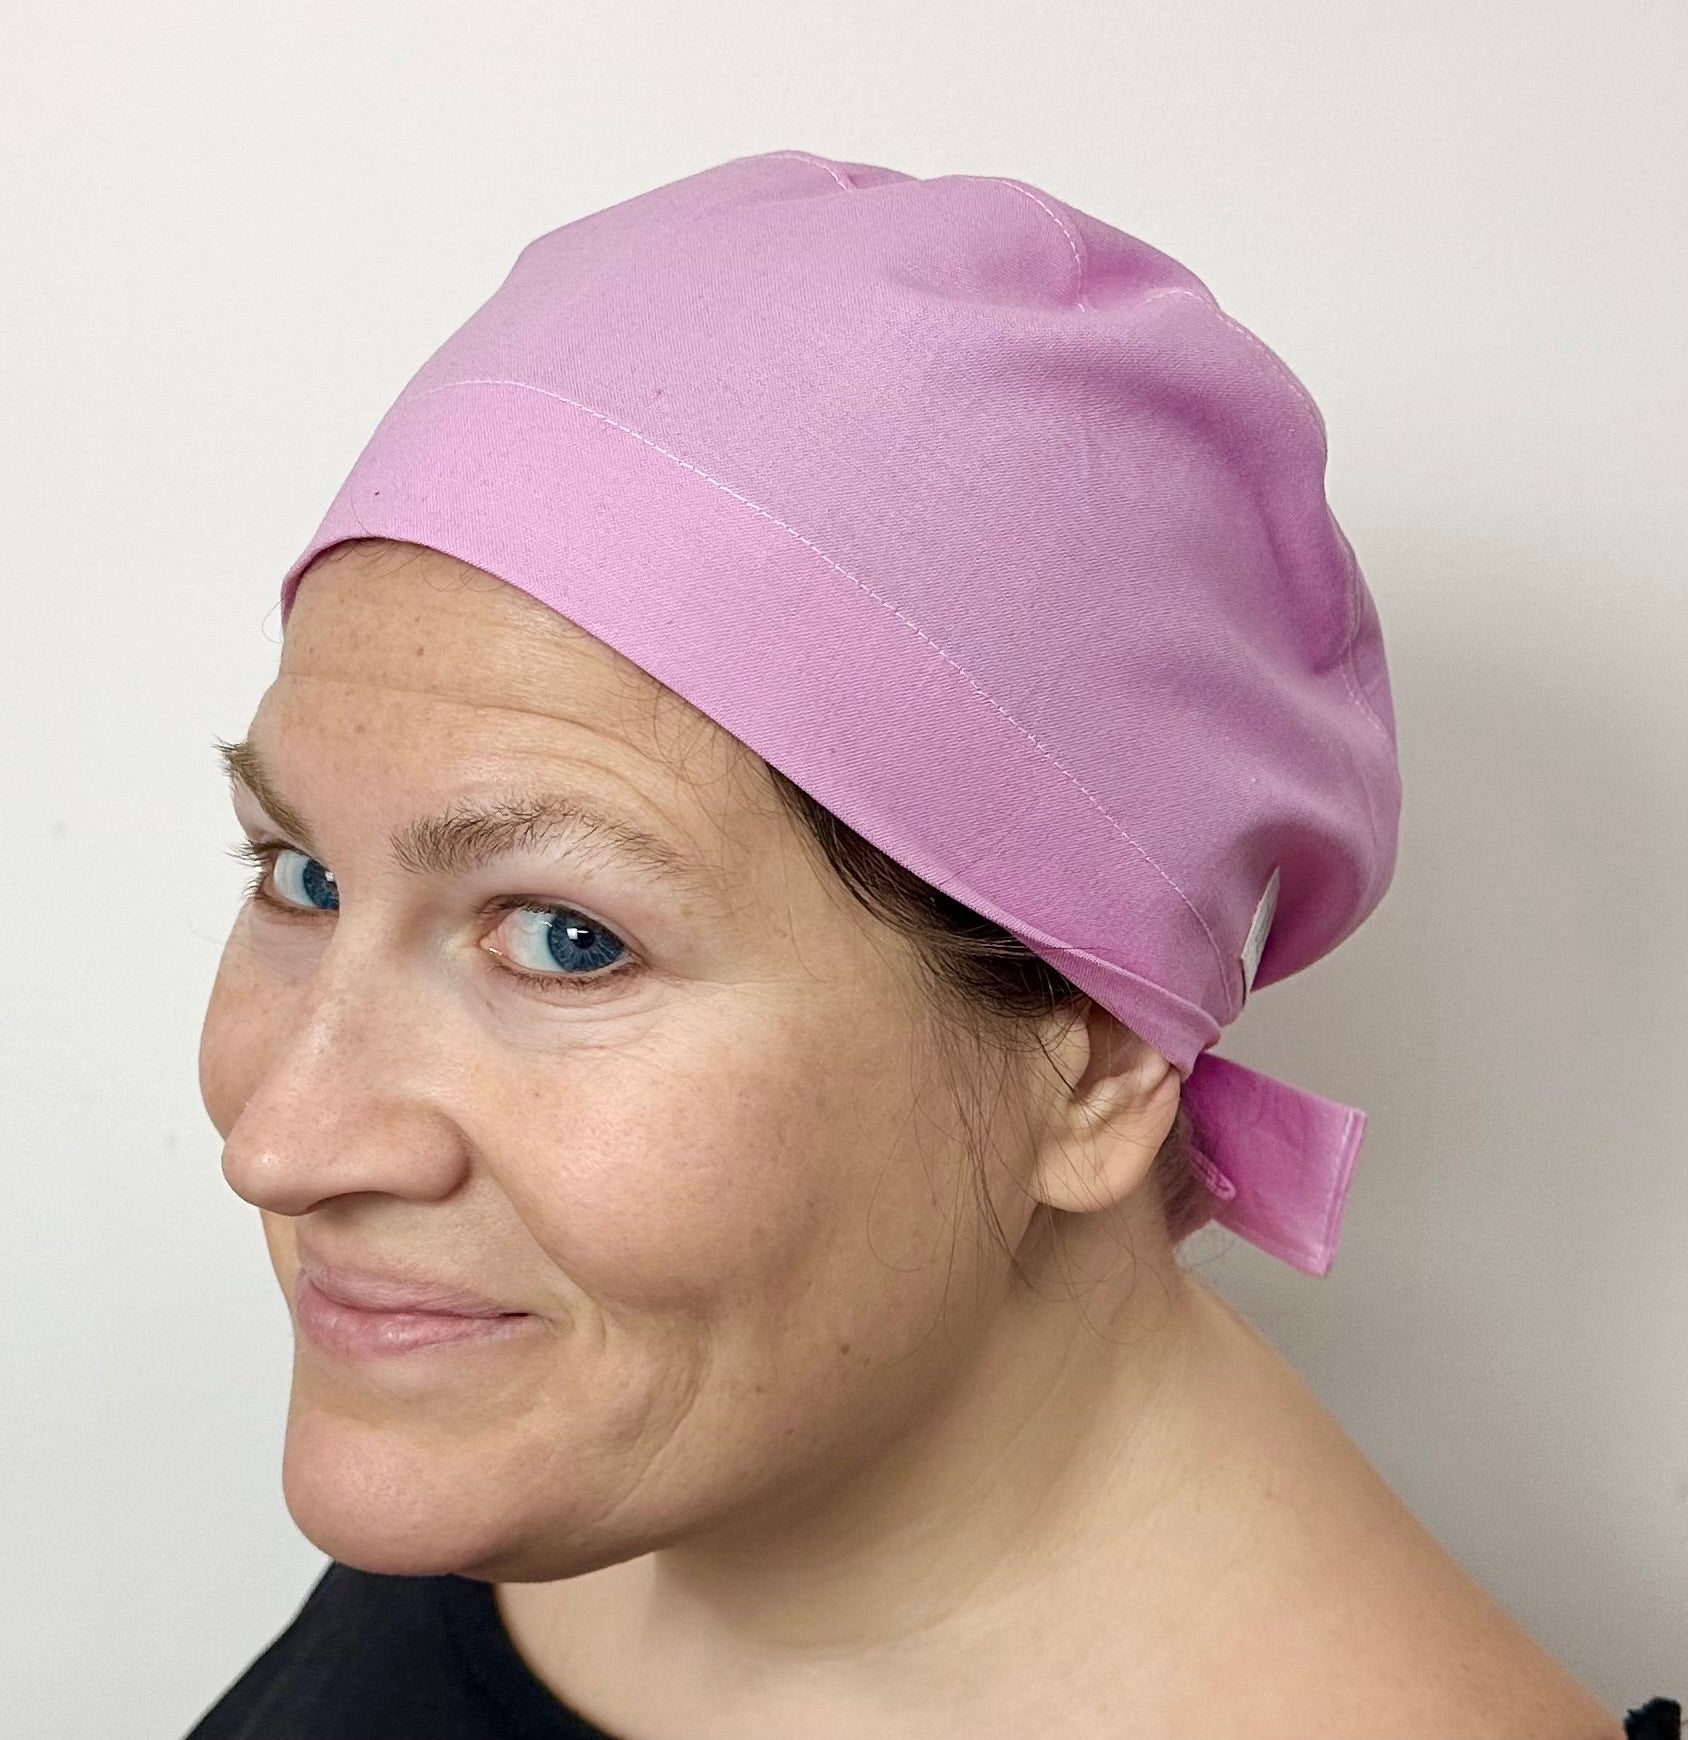 Hippy Style Scrub Cap Tie Back or Bouffant Style